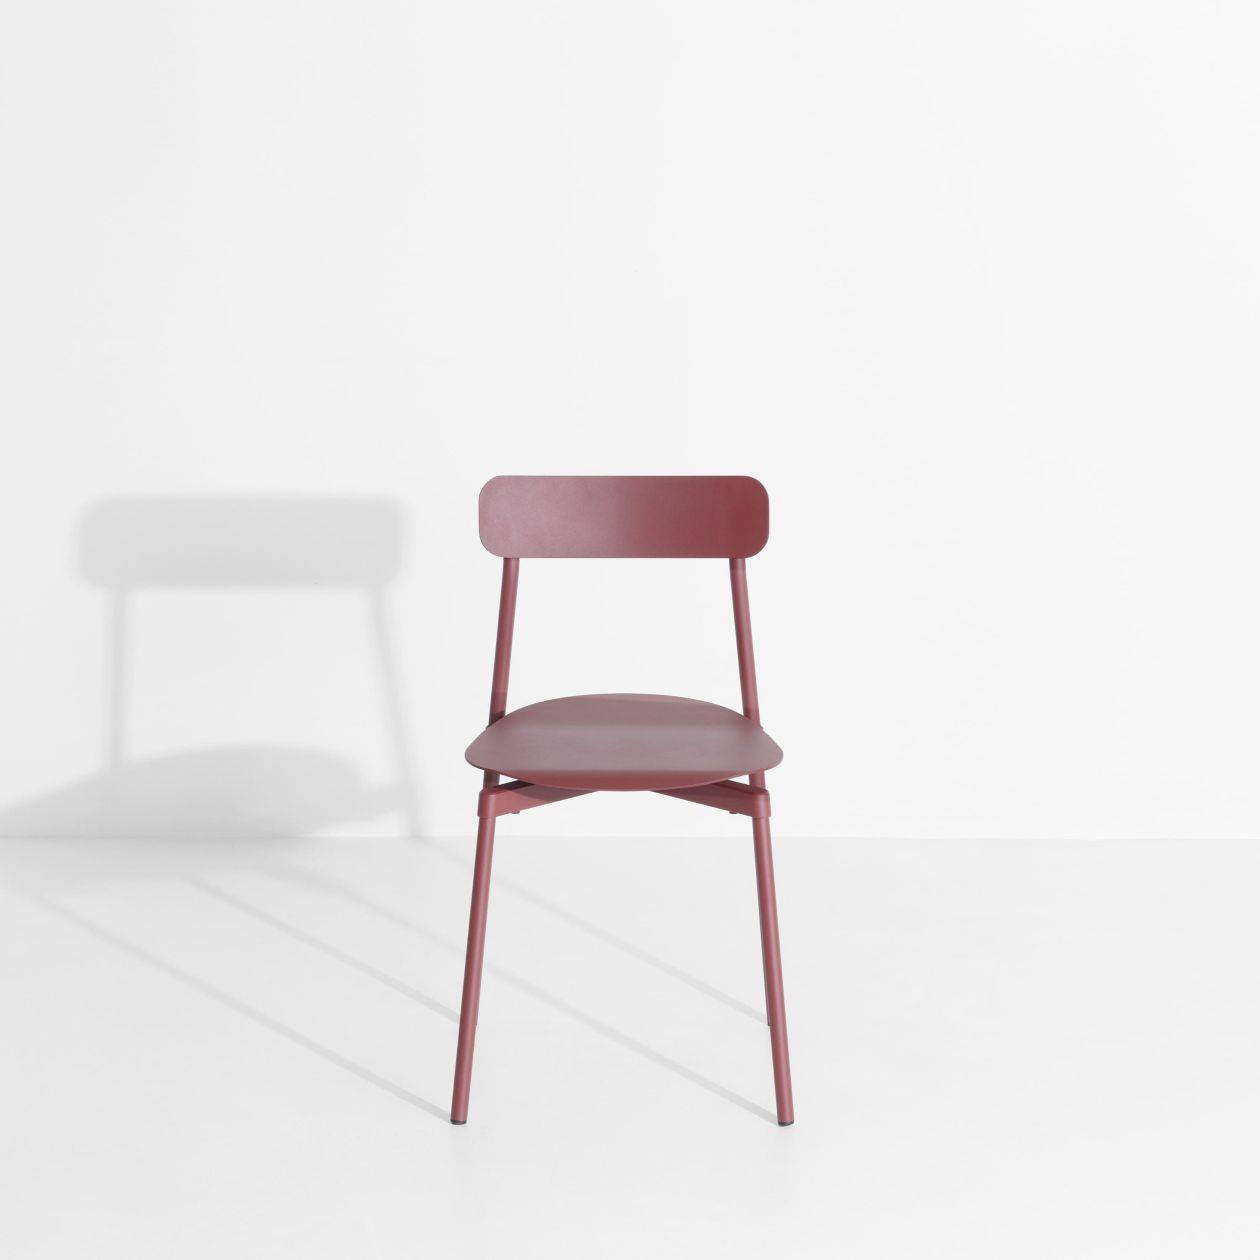 Fromme Chair - Red brown